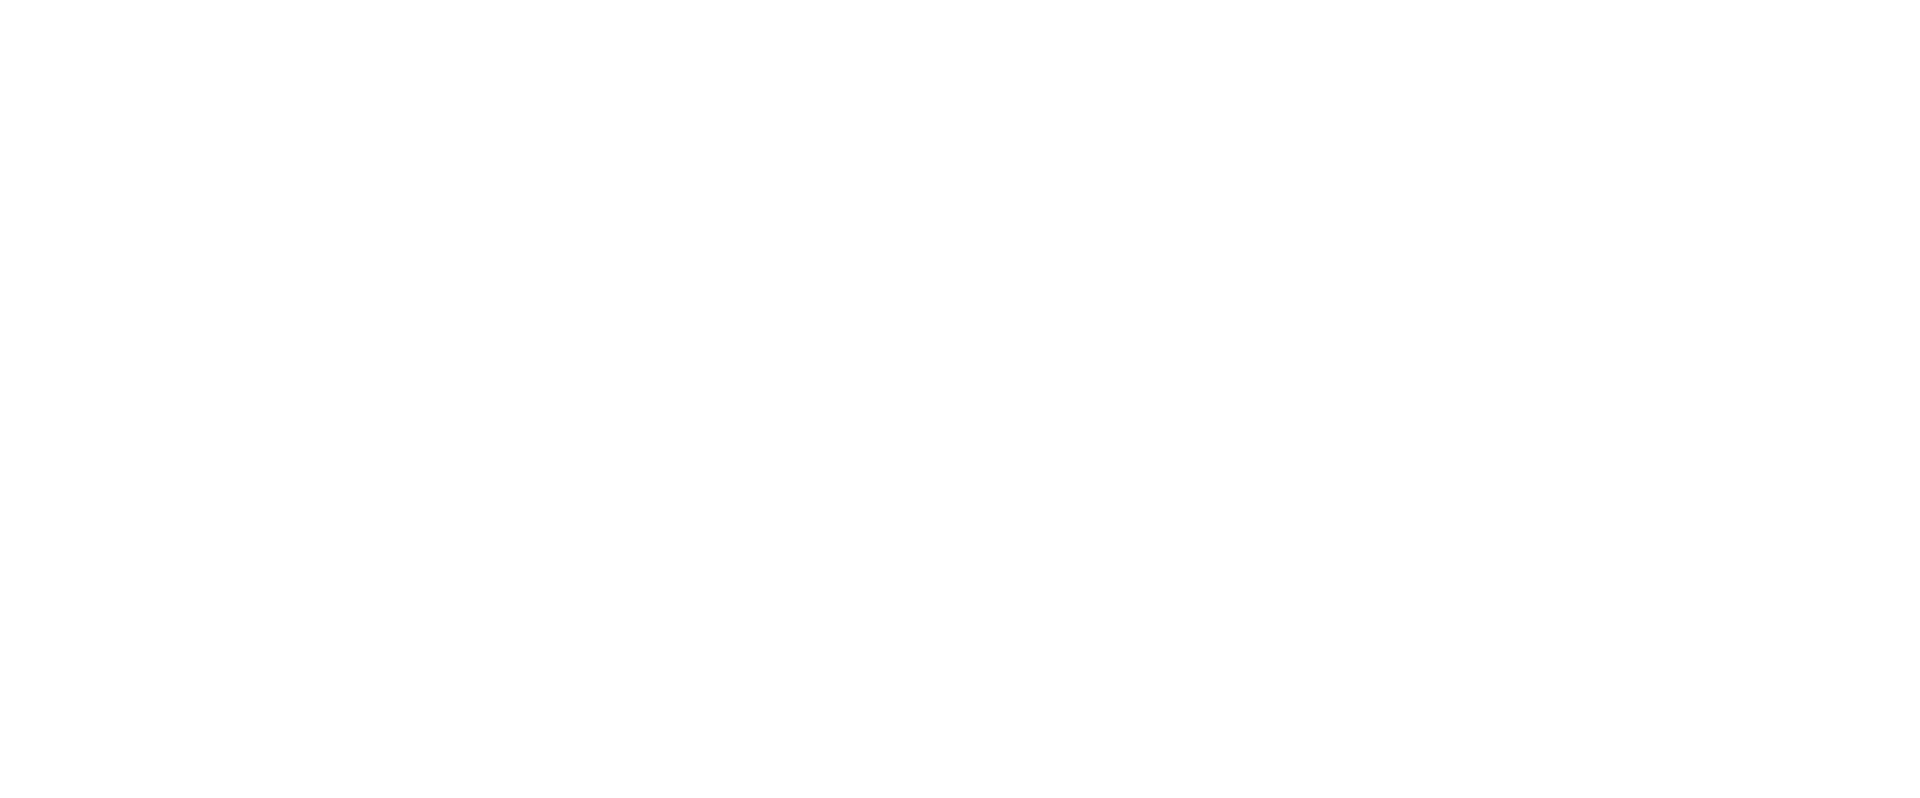 Camel Connections Logo PNG